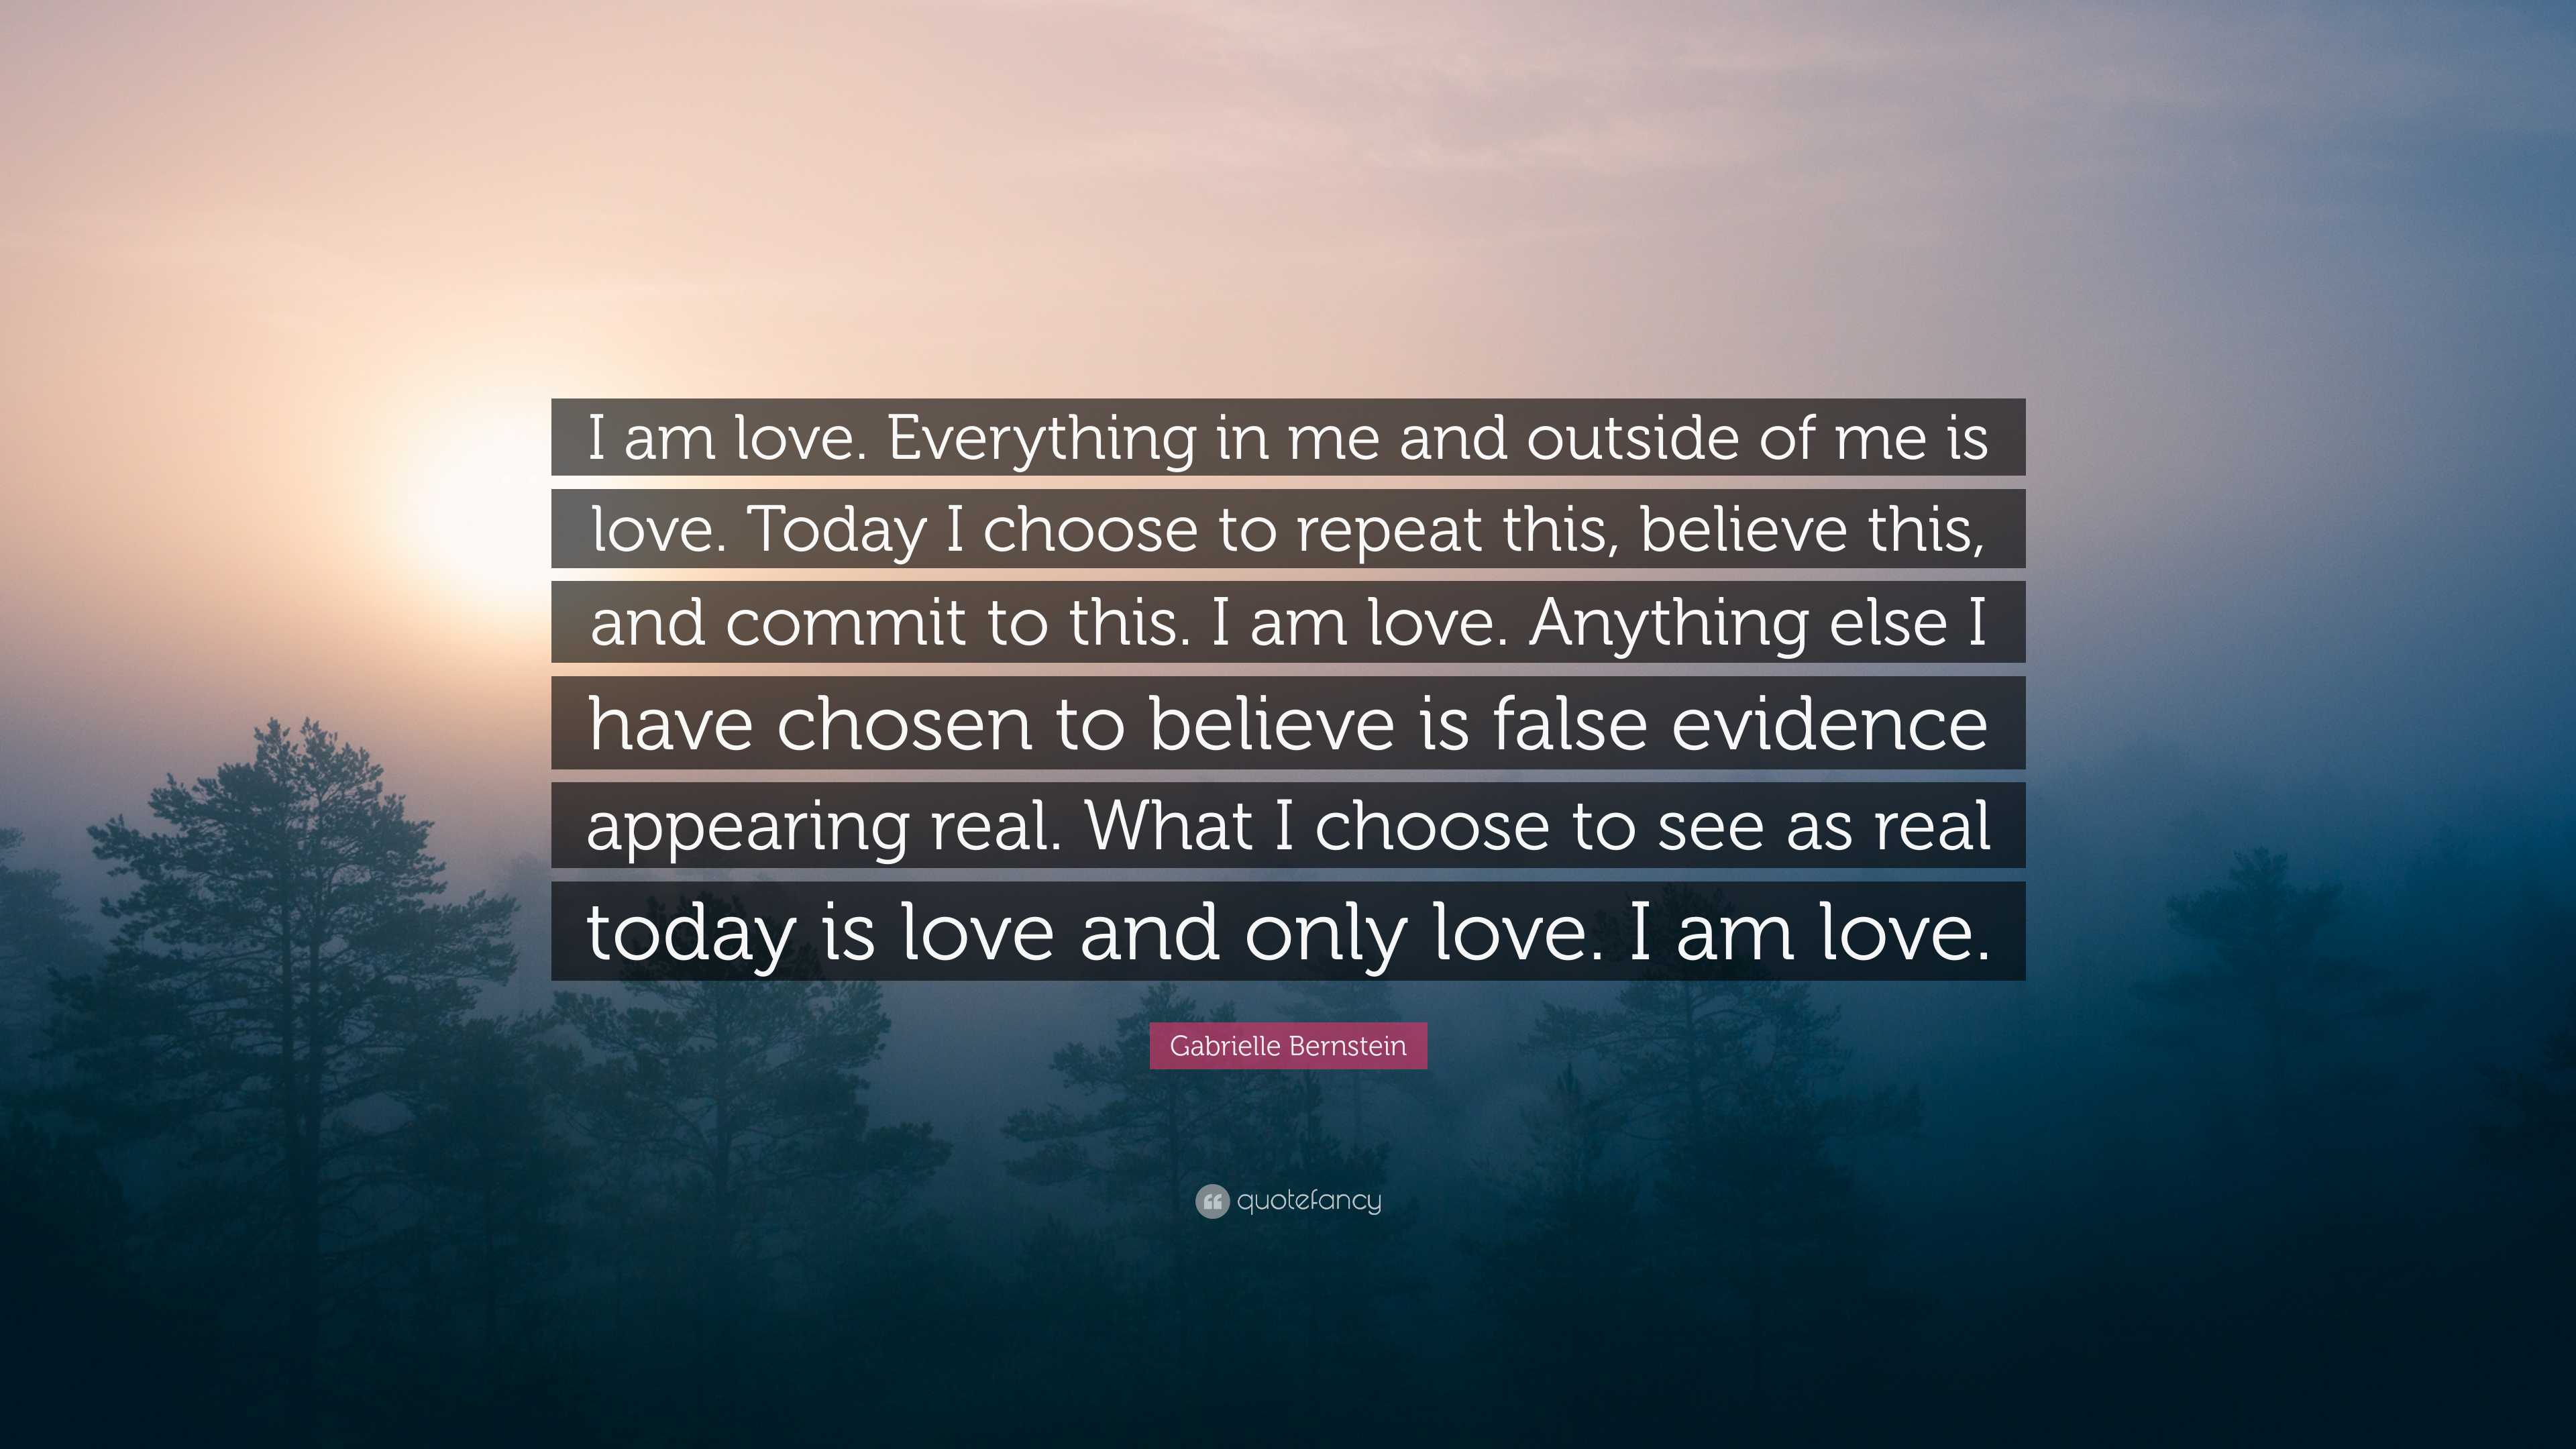 Gabrielle Bernstein Quote: “I am love. Everything in me and